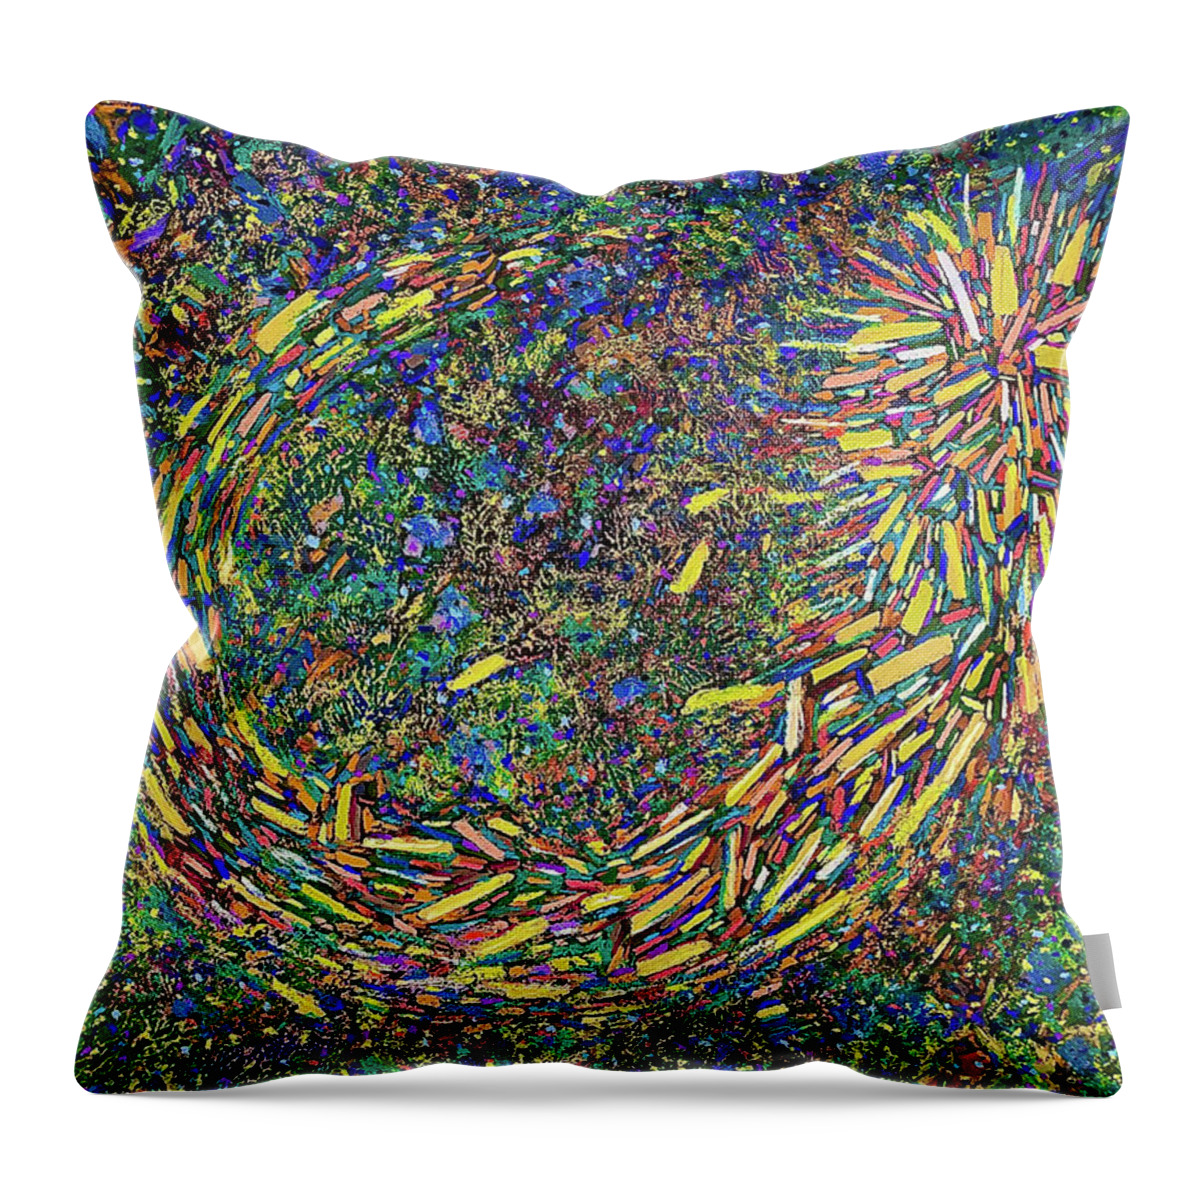  Throw Pillow featuring the painting Breathe In by Polly Castor